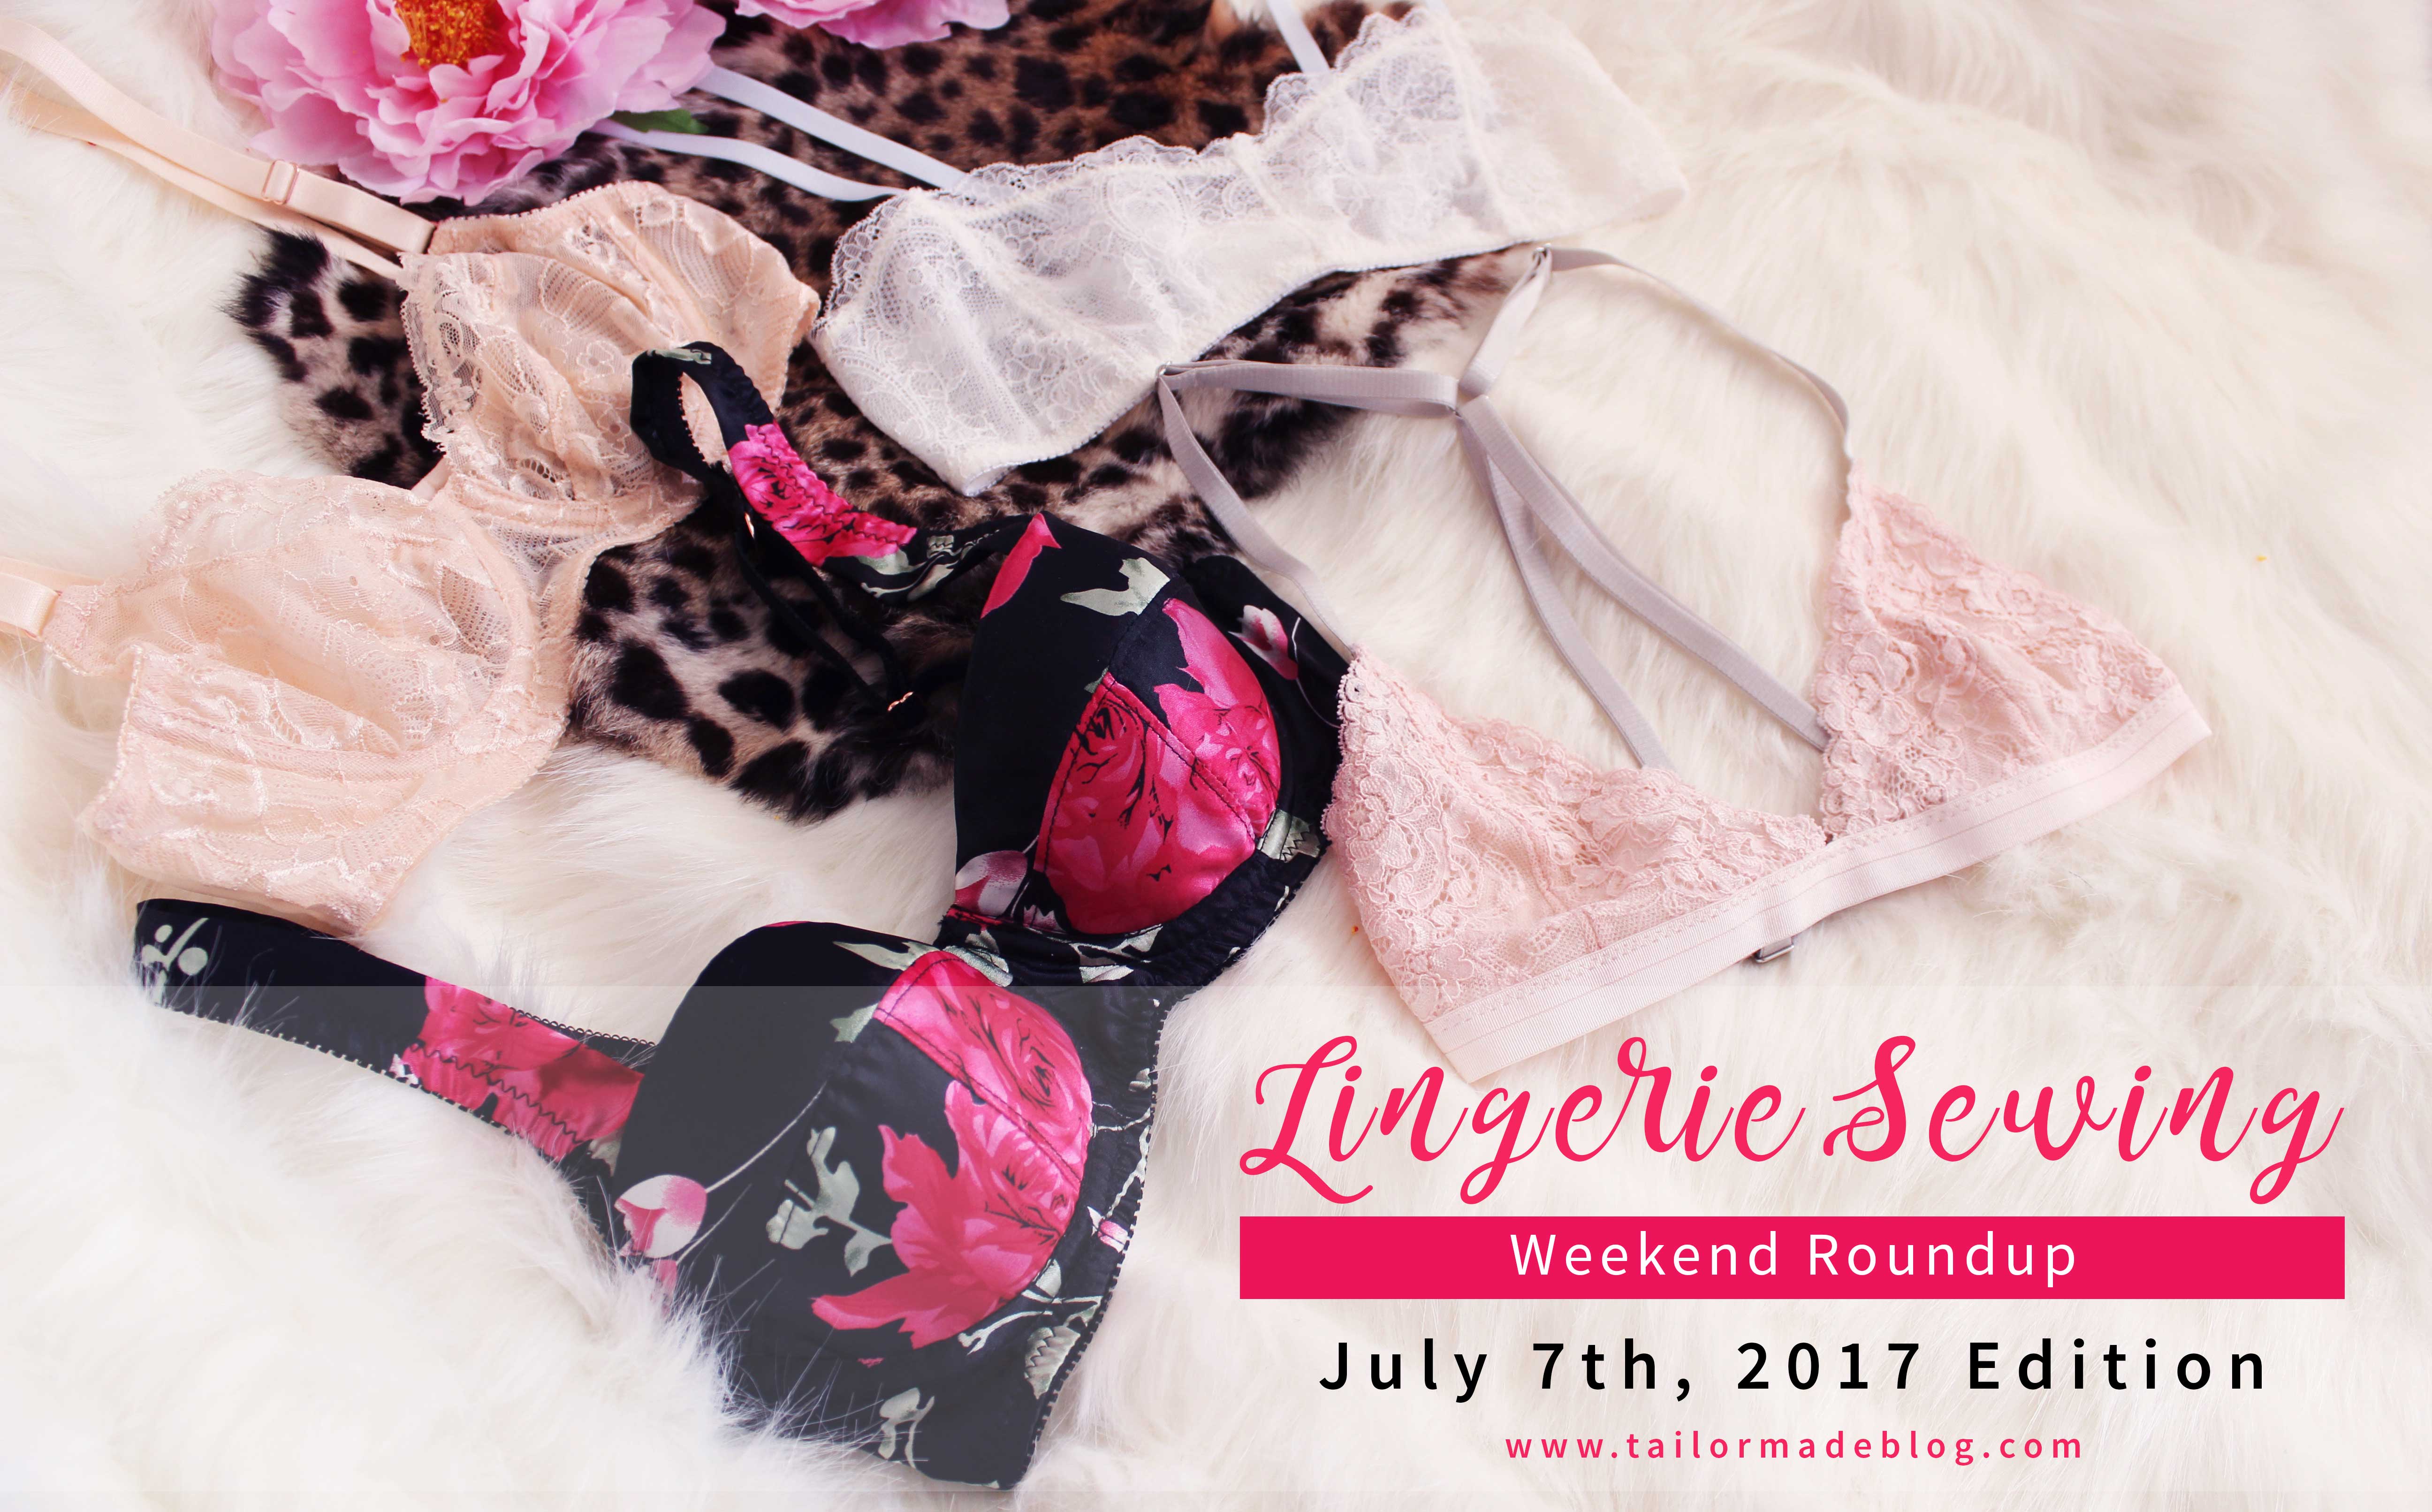 7-7-17-weekend-roundup catch up on latest news in the bra making community